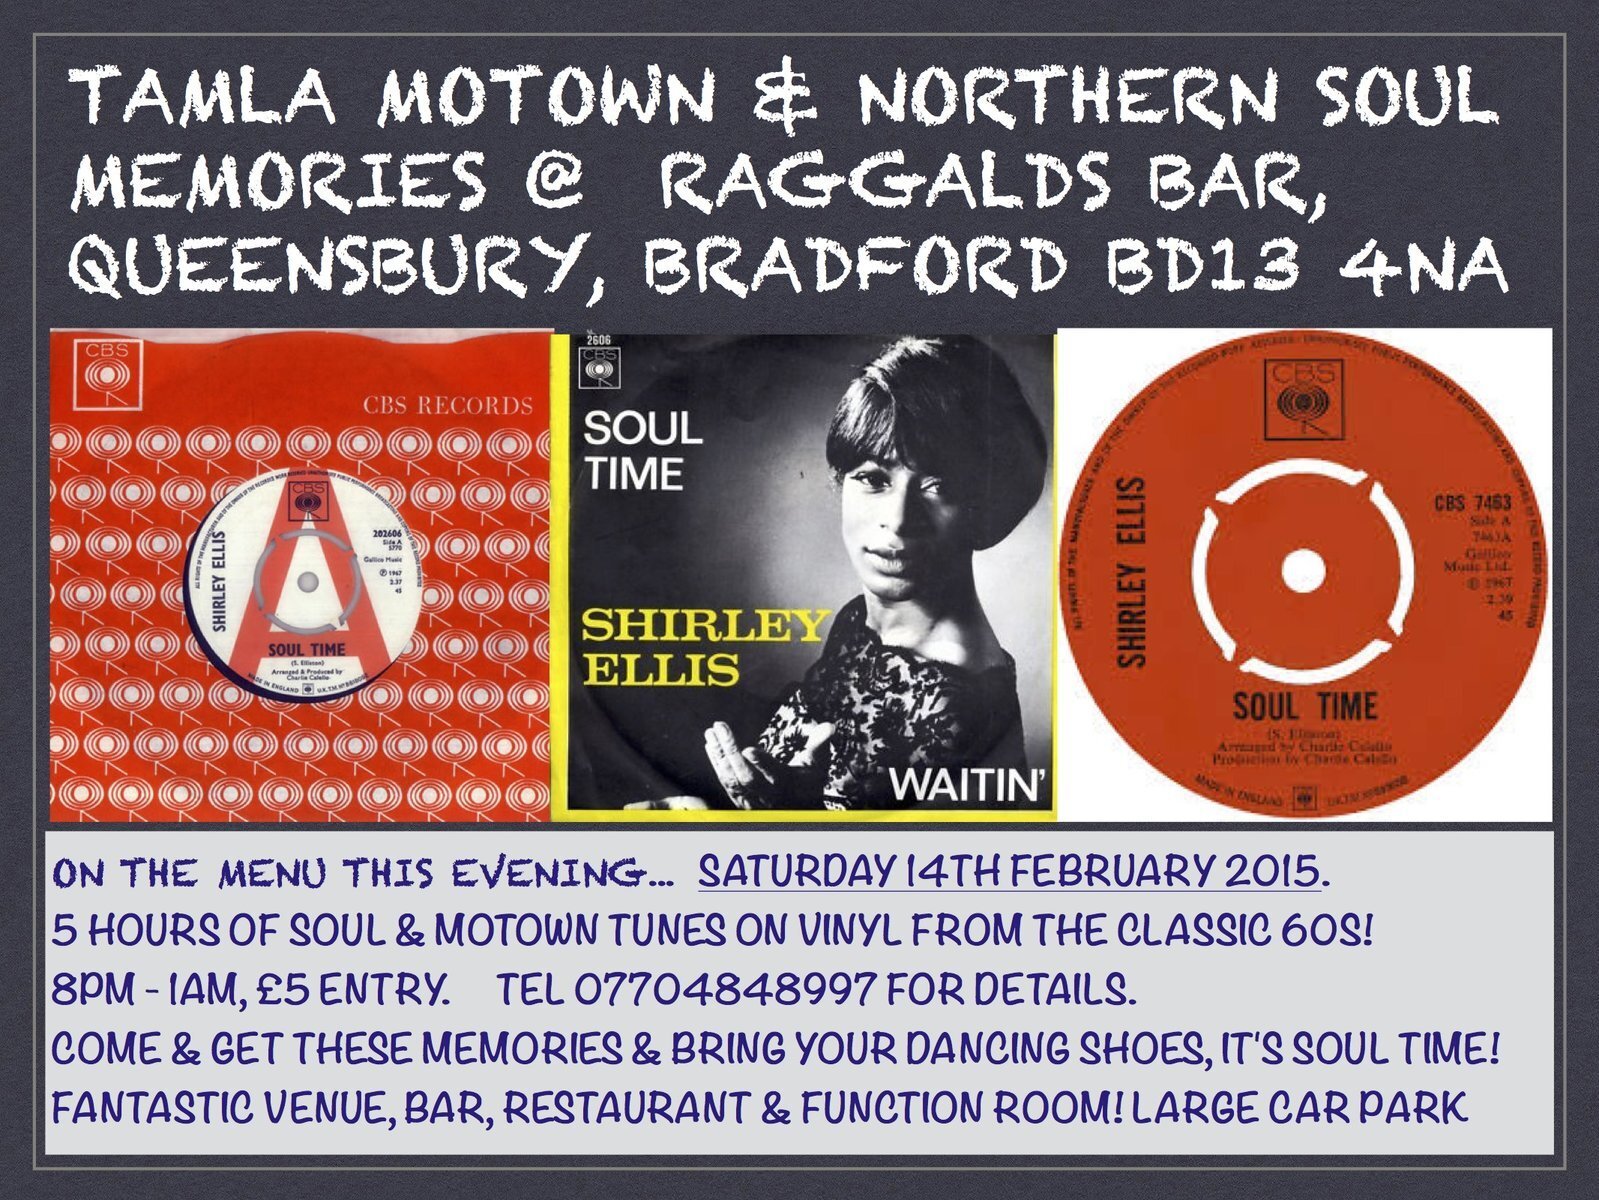 Raggalds Northern Soul & Motown event